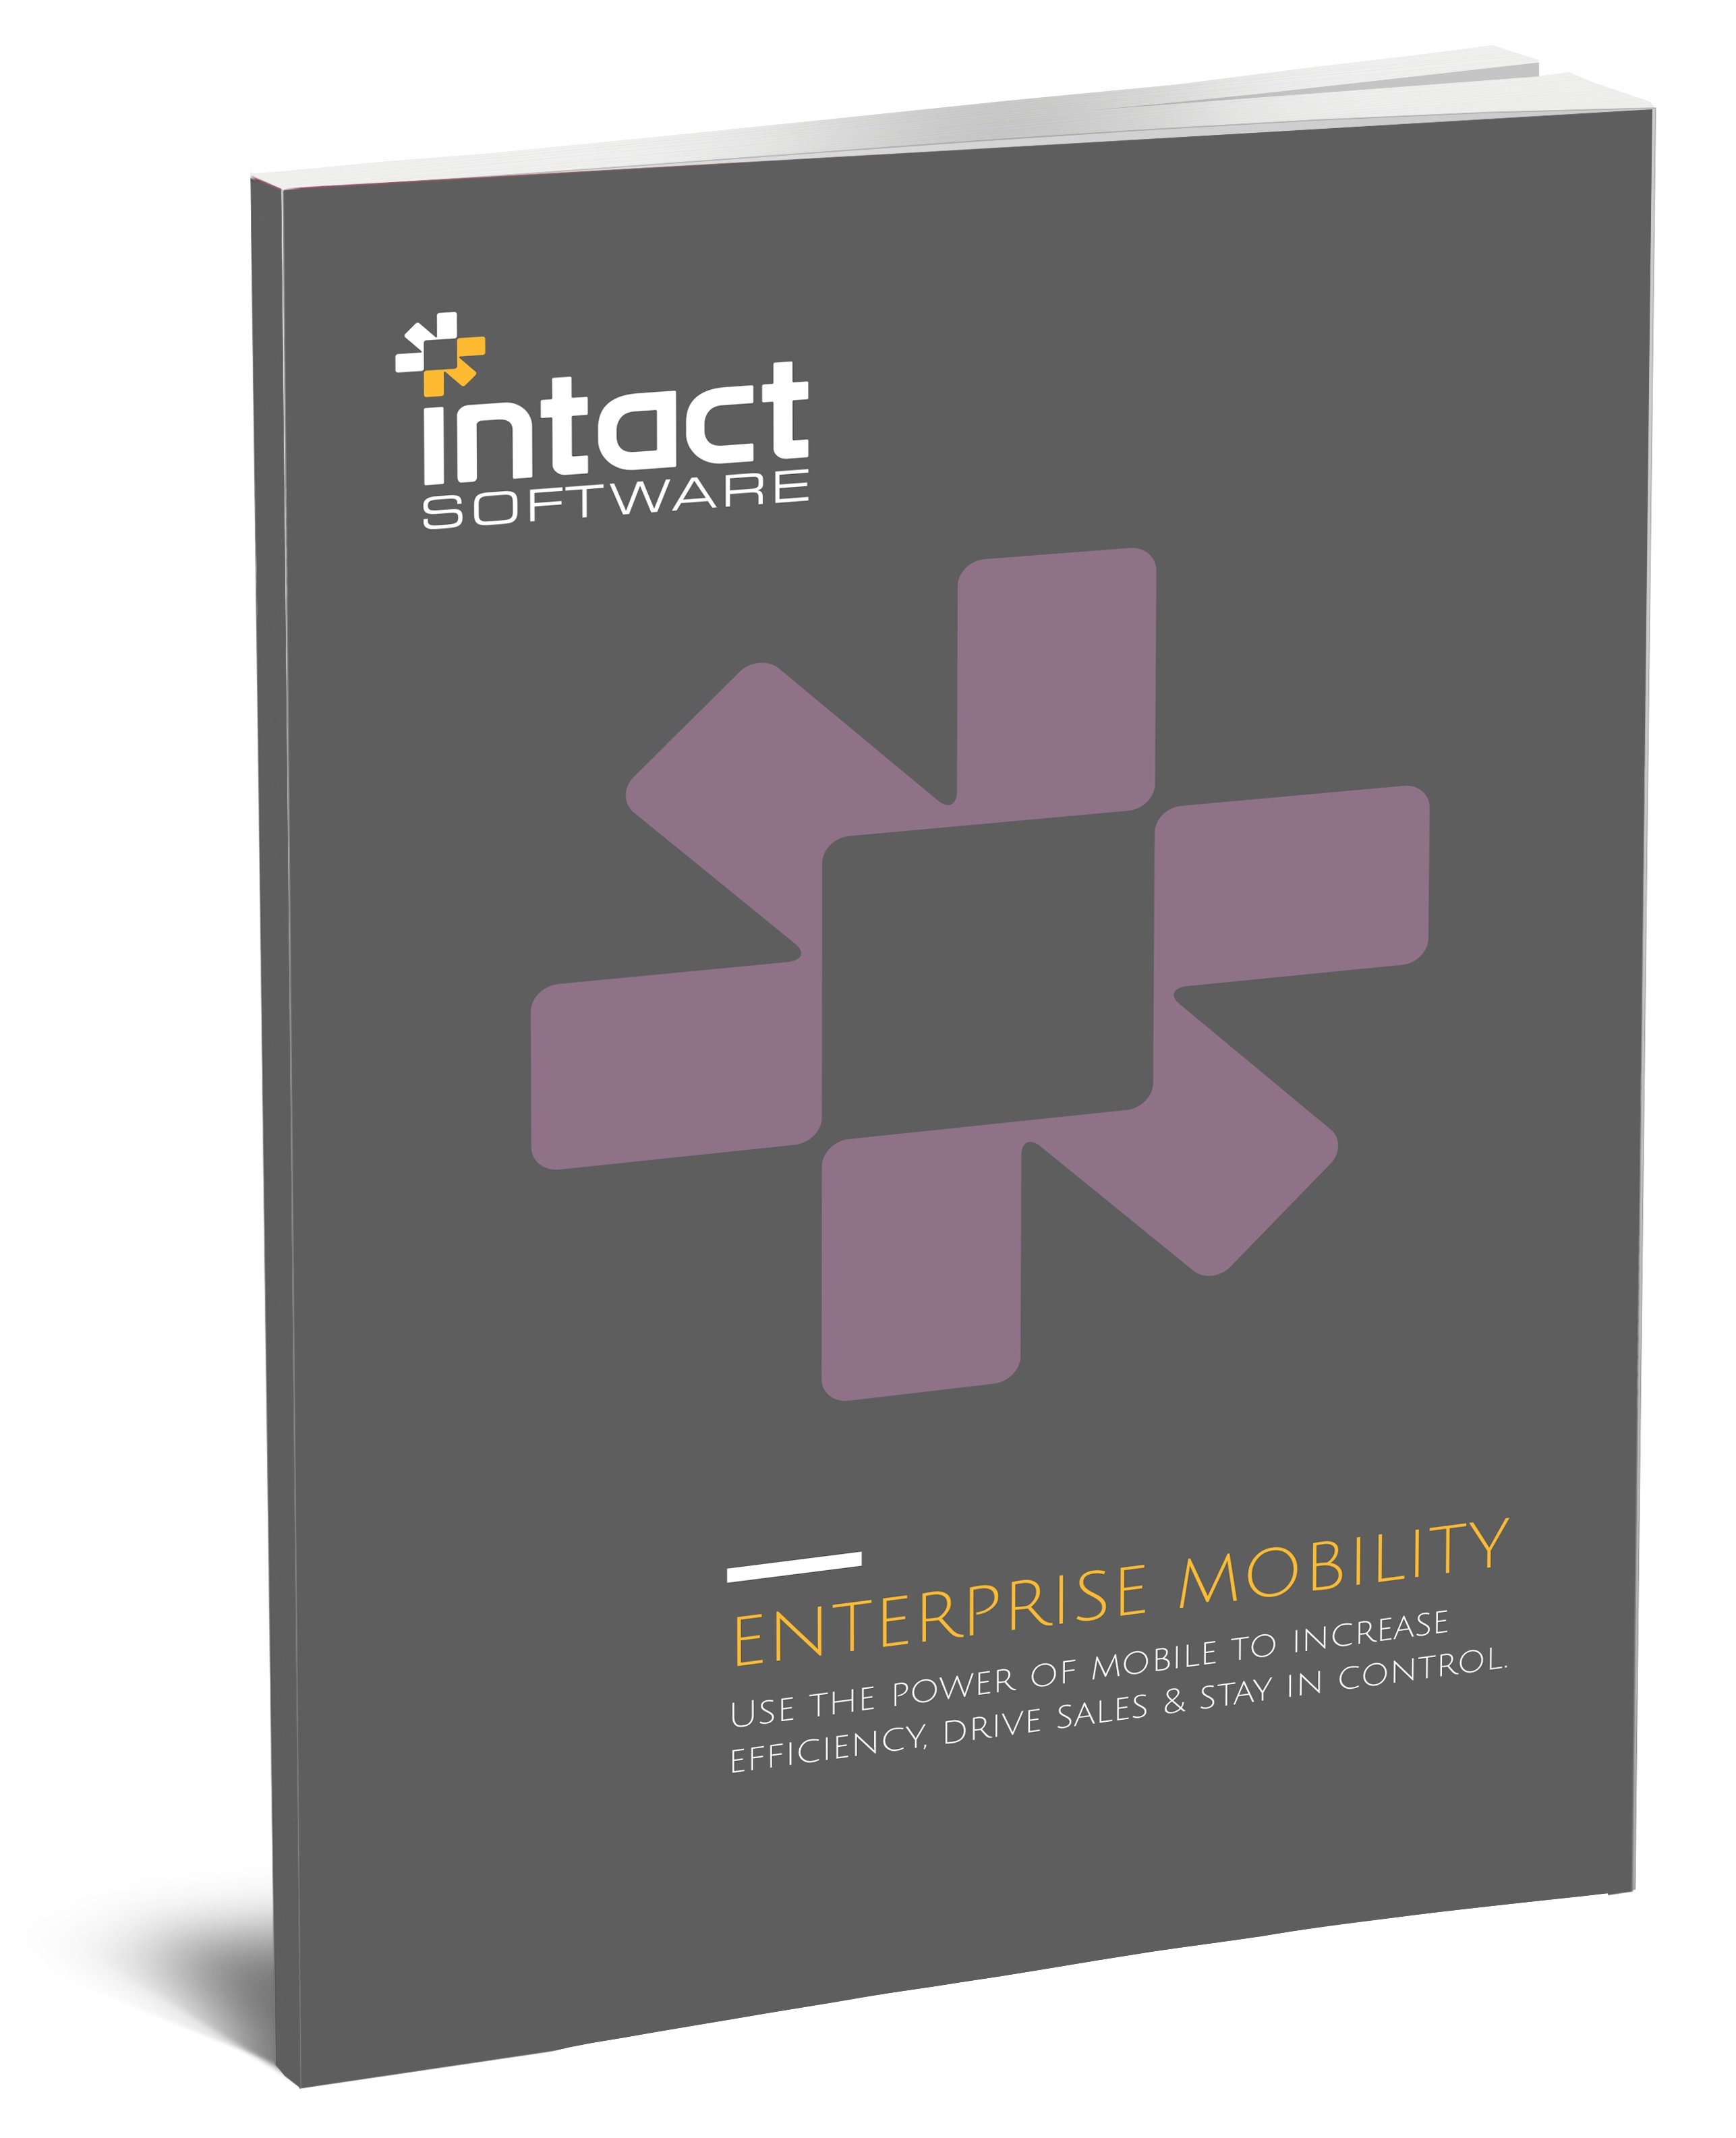 Enterprise Mobility_Intact Insights.jpg